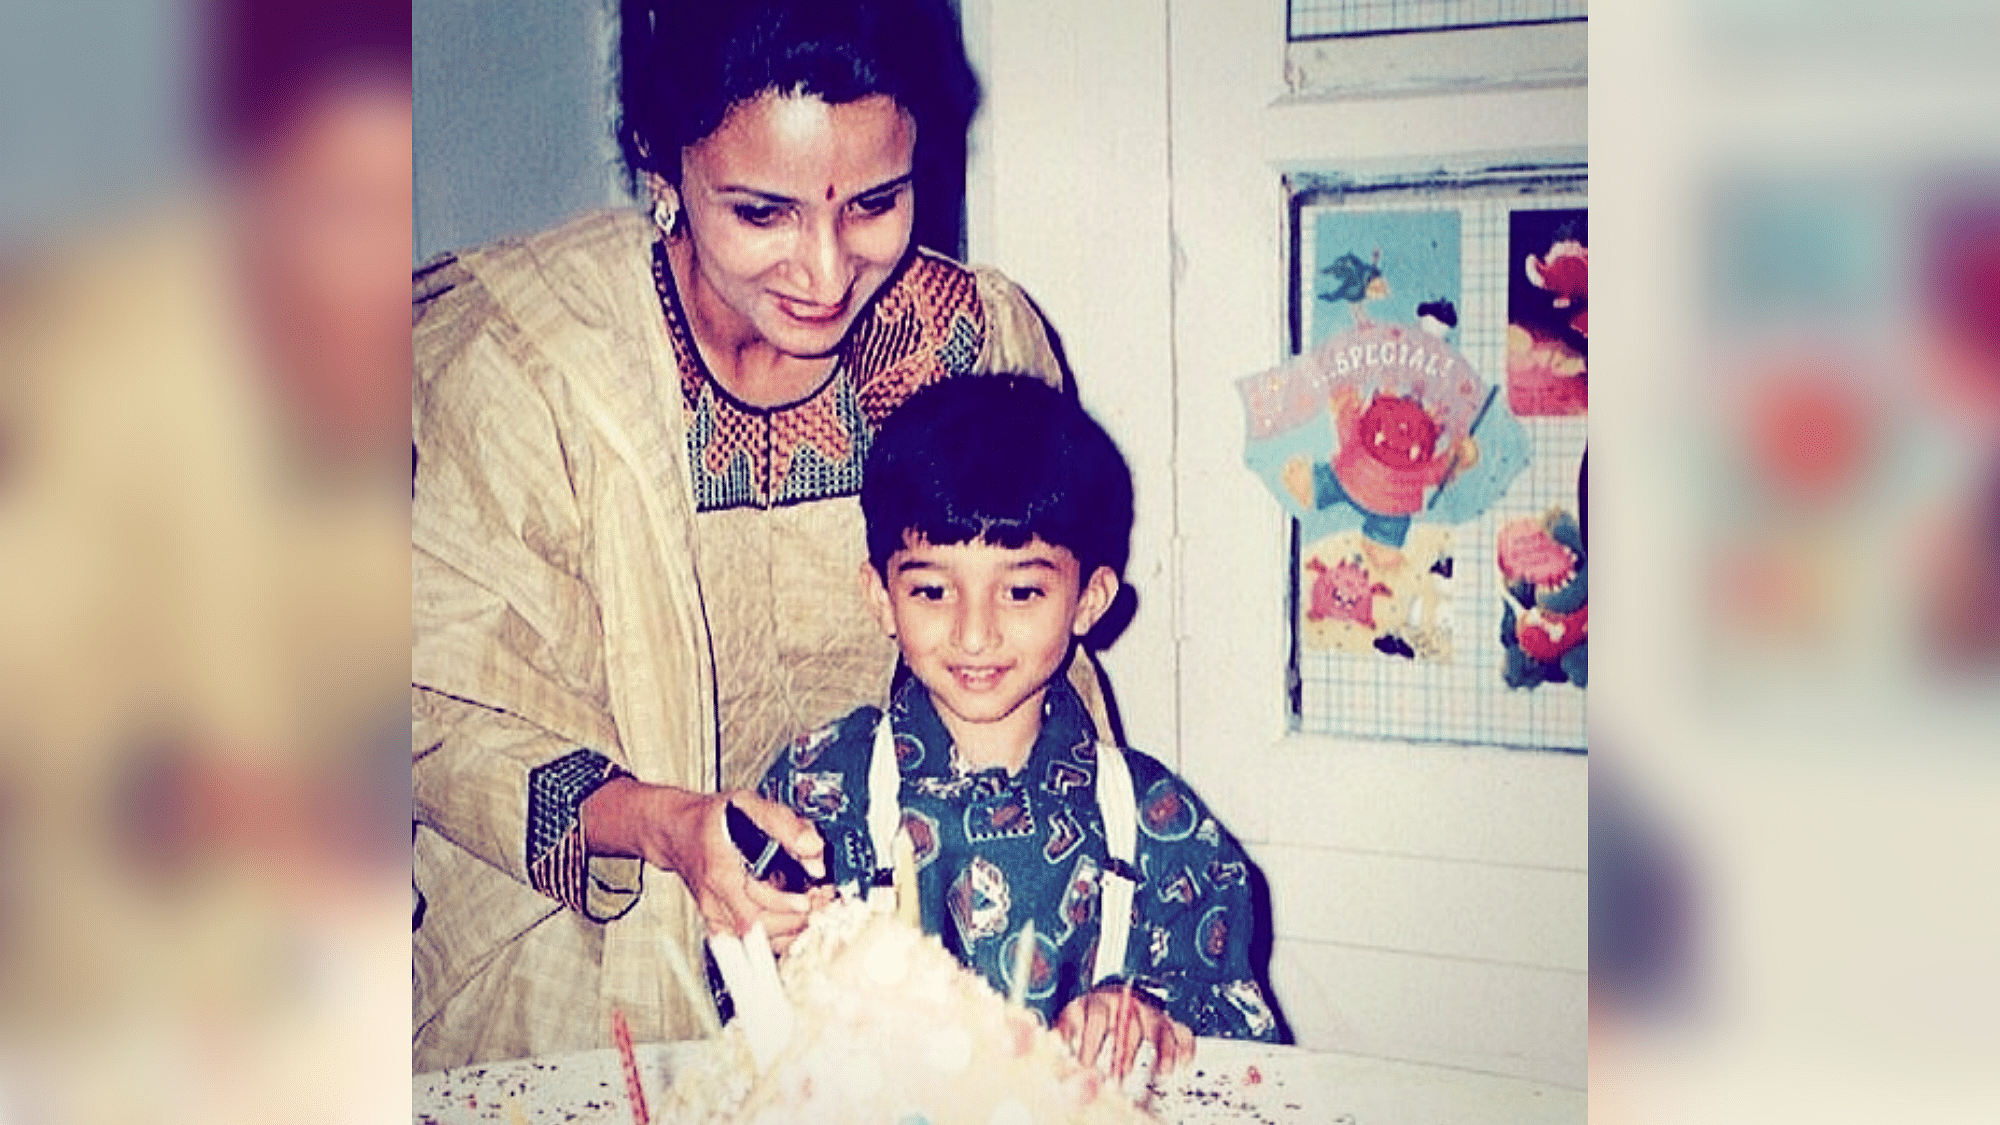 Lina with her son Adi on his birthday.